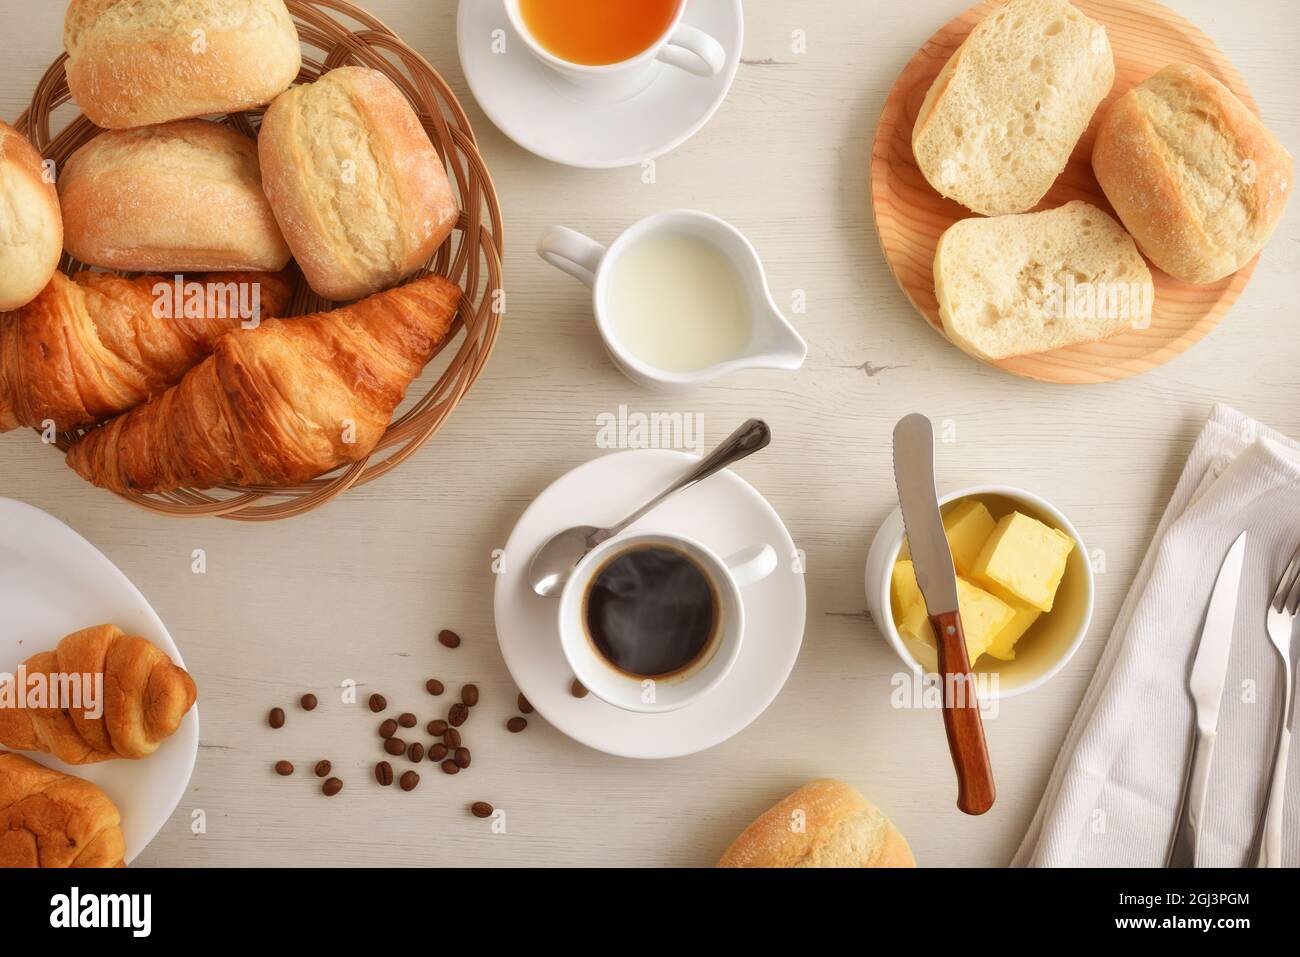 Morning coffee on a white wooden table with plate with two croissants and bread with isolated white background. Front view. Horizontal composition. Stock Photo